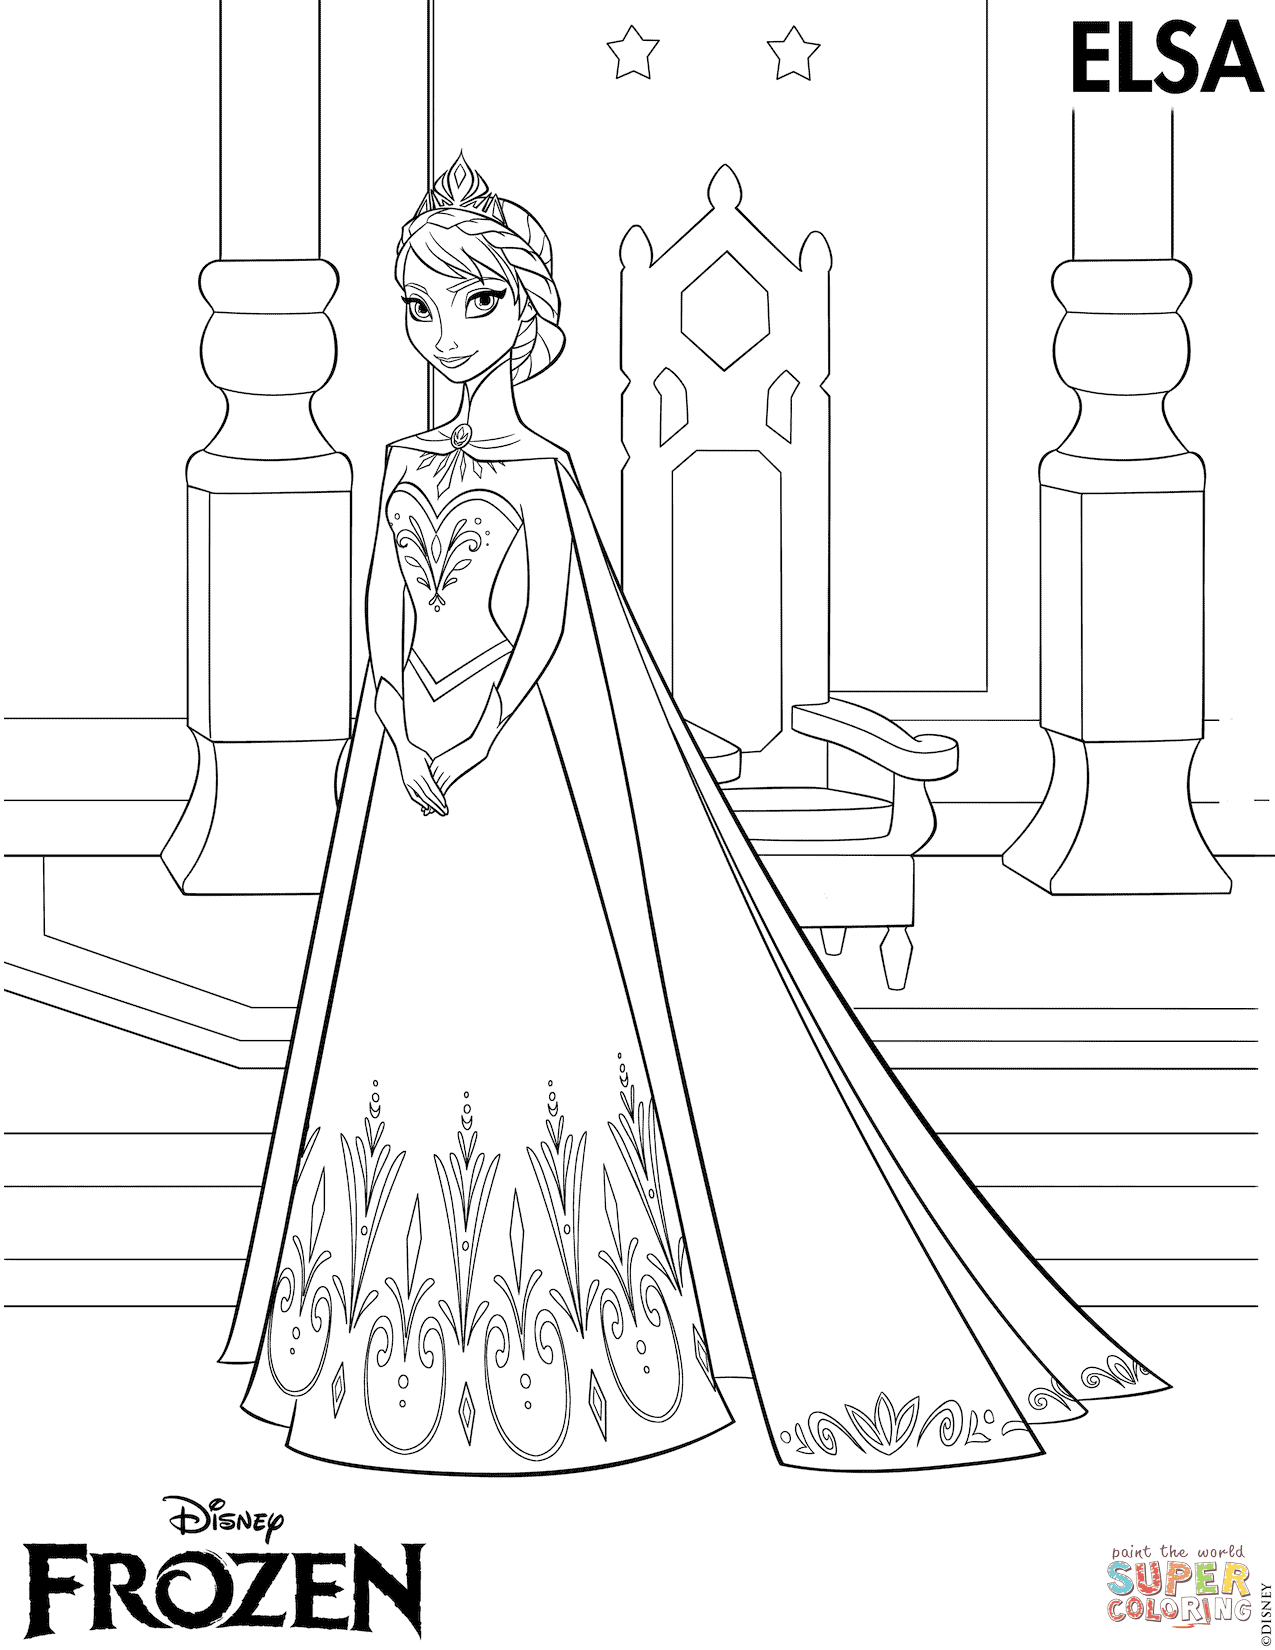 Best Anna Frozen Coloring Pages Images - Coloring Pages ...